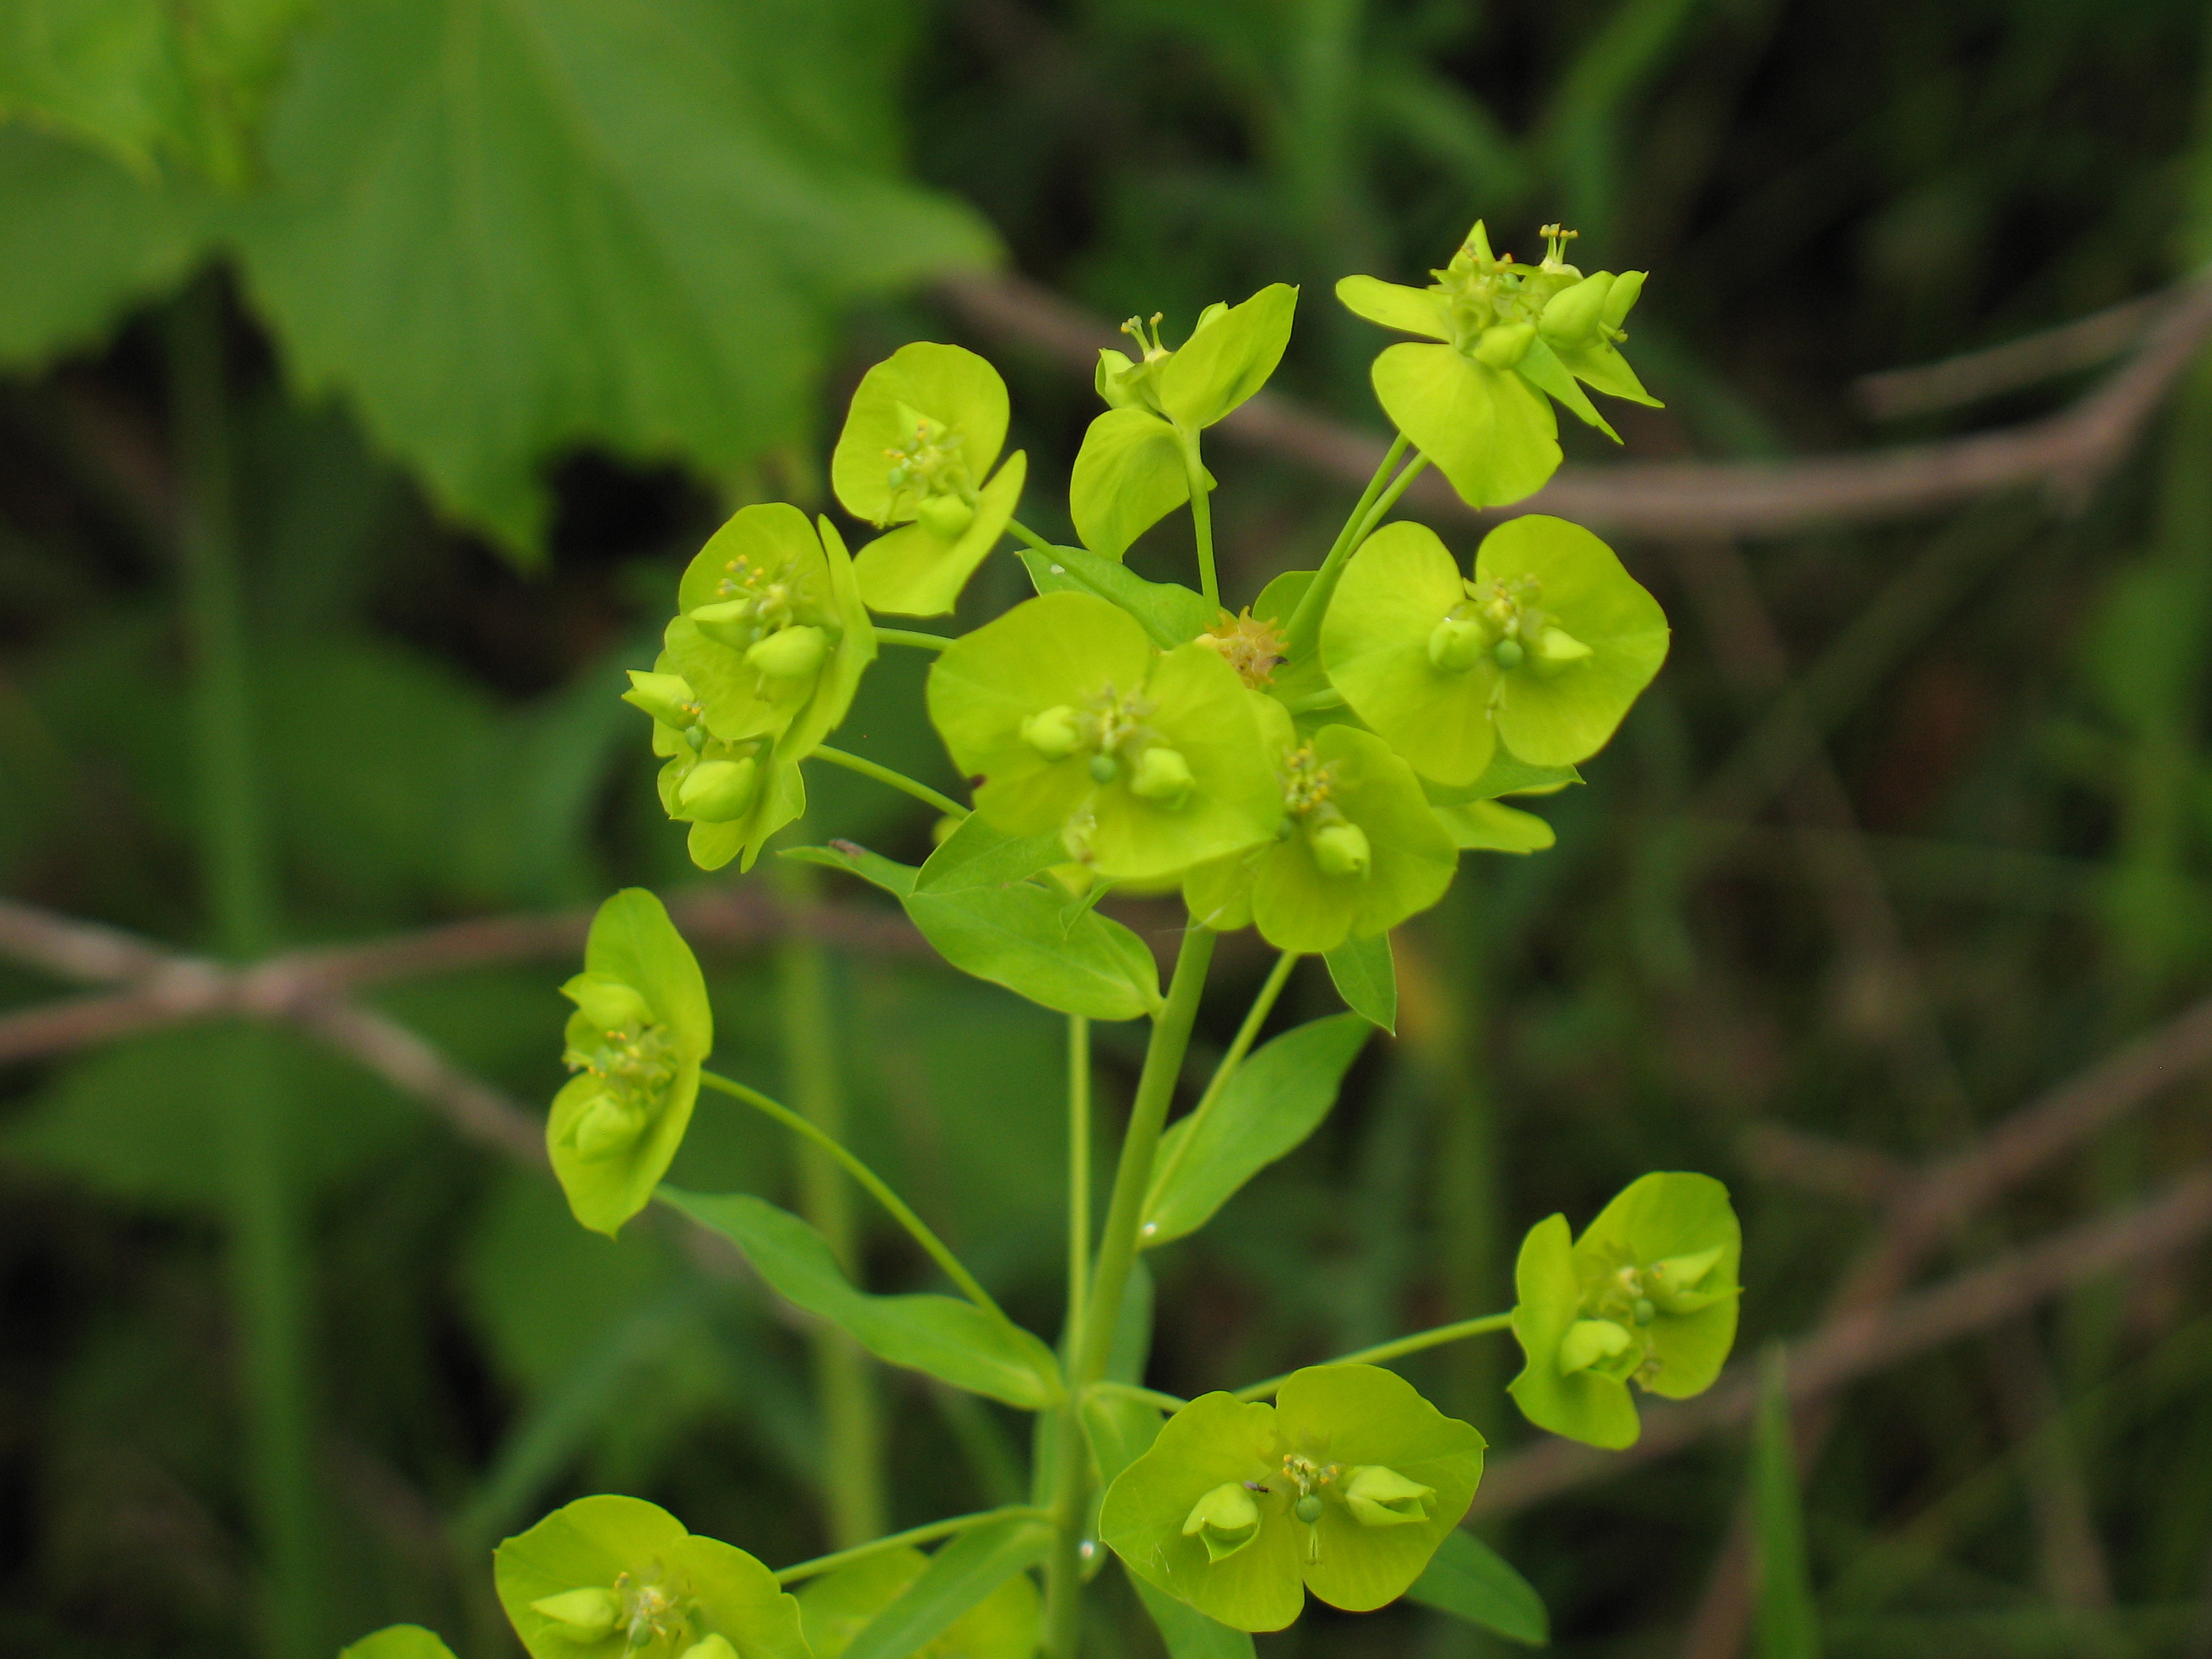 Leafy spurge (Euphorbia esula), a particularly troublesome invader of prairies and savannas, is present in small pockets on the Houlton Farm property. Early detection is key to managing invasions of this and other invasive species.